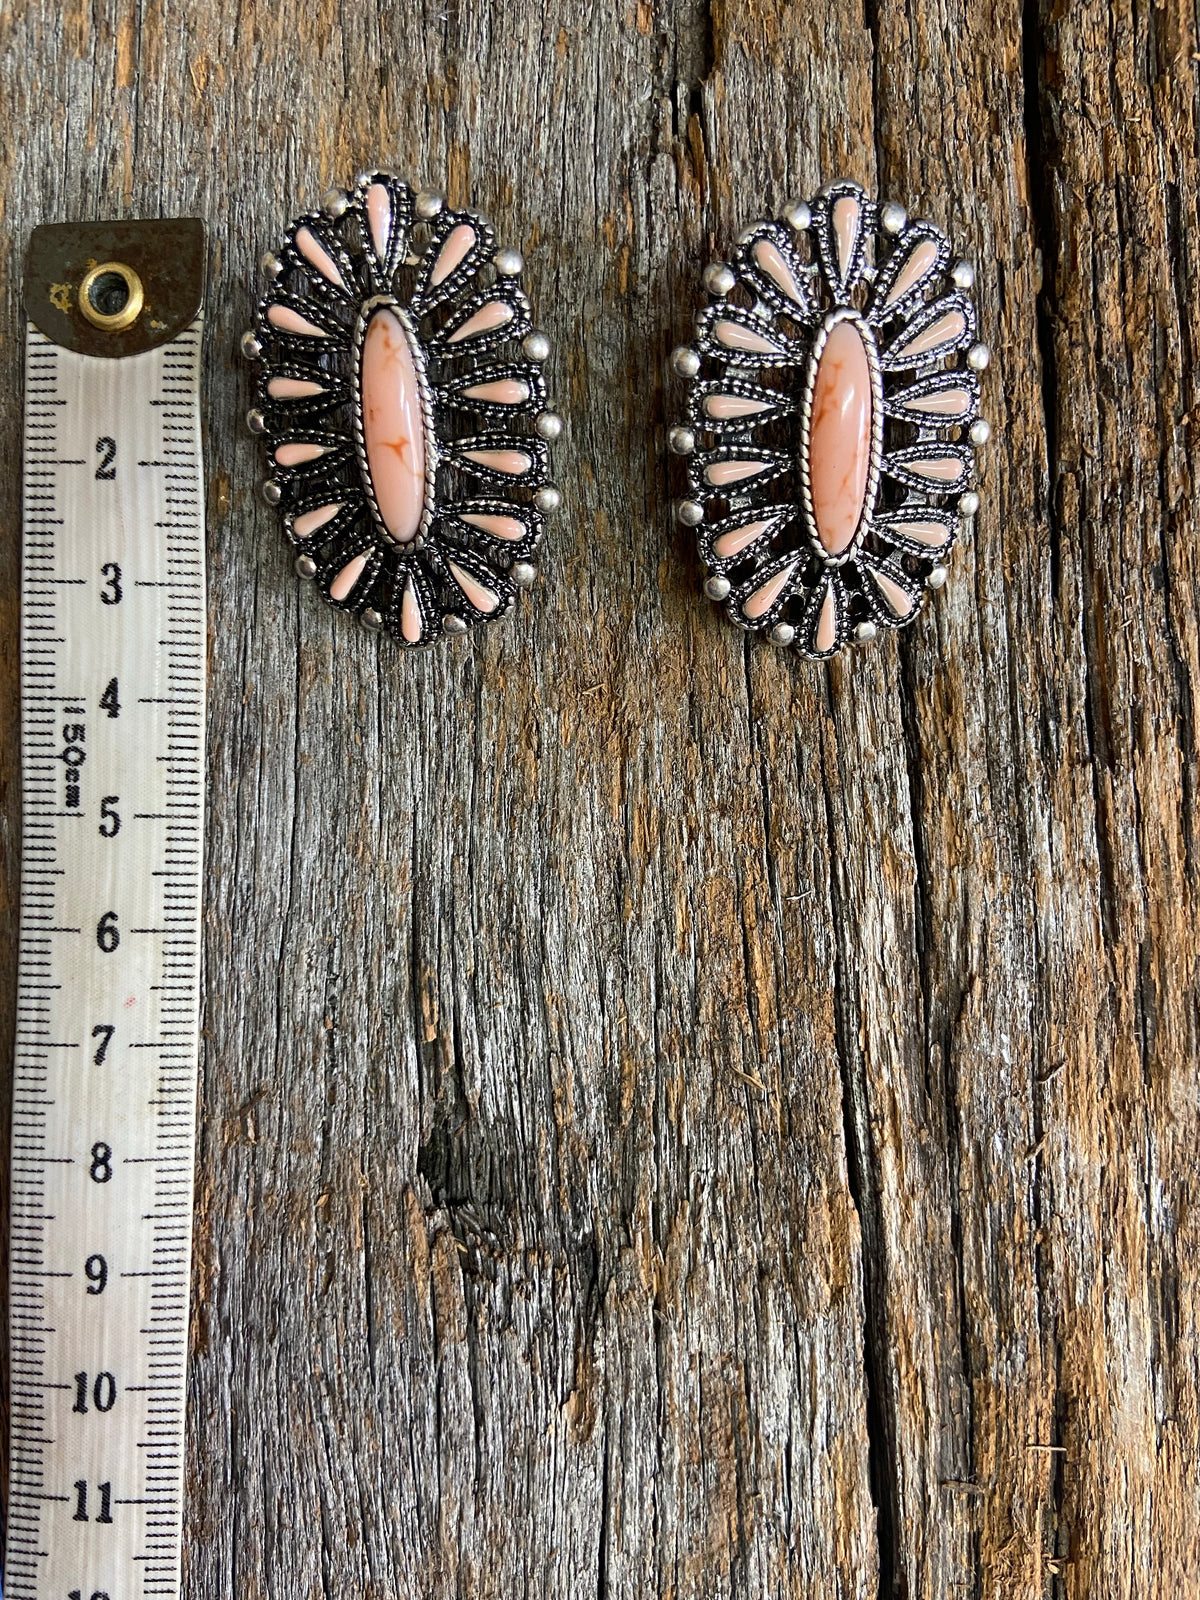 Western Earrings - Antique Silver and Apricot